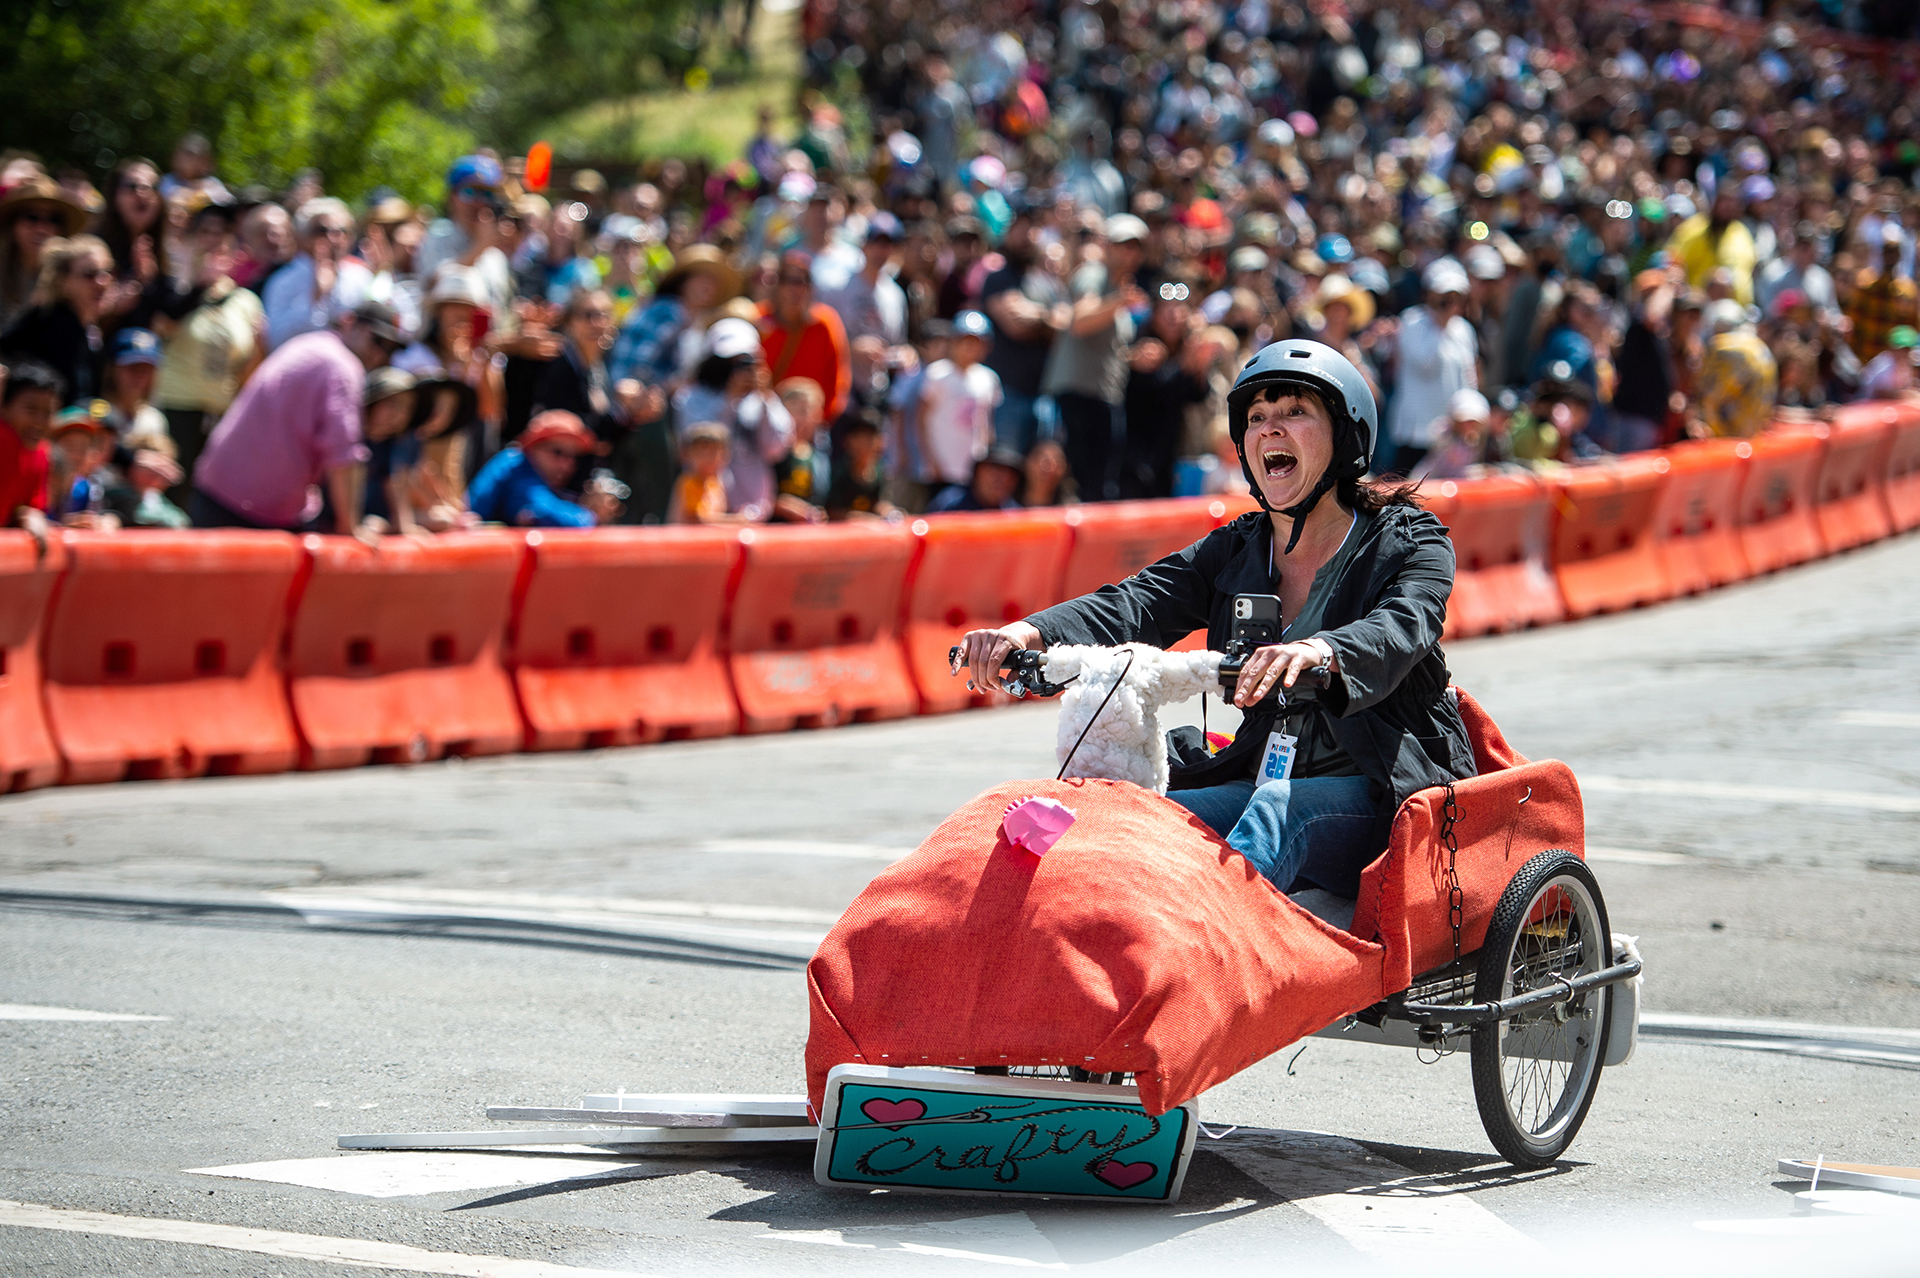 A person with light skin screams in what looks like a mix of excitement, delight and fear as they ride a red colored soapbox car down a hill. A crowd of people stands behind them out of focus behind a bright red barrier.